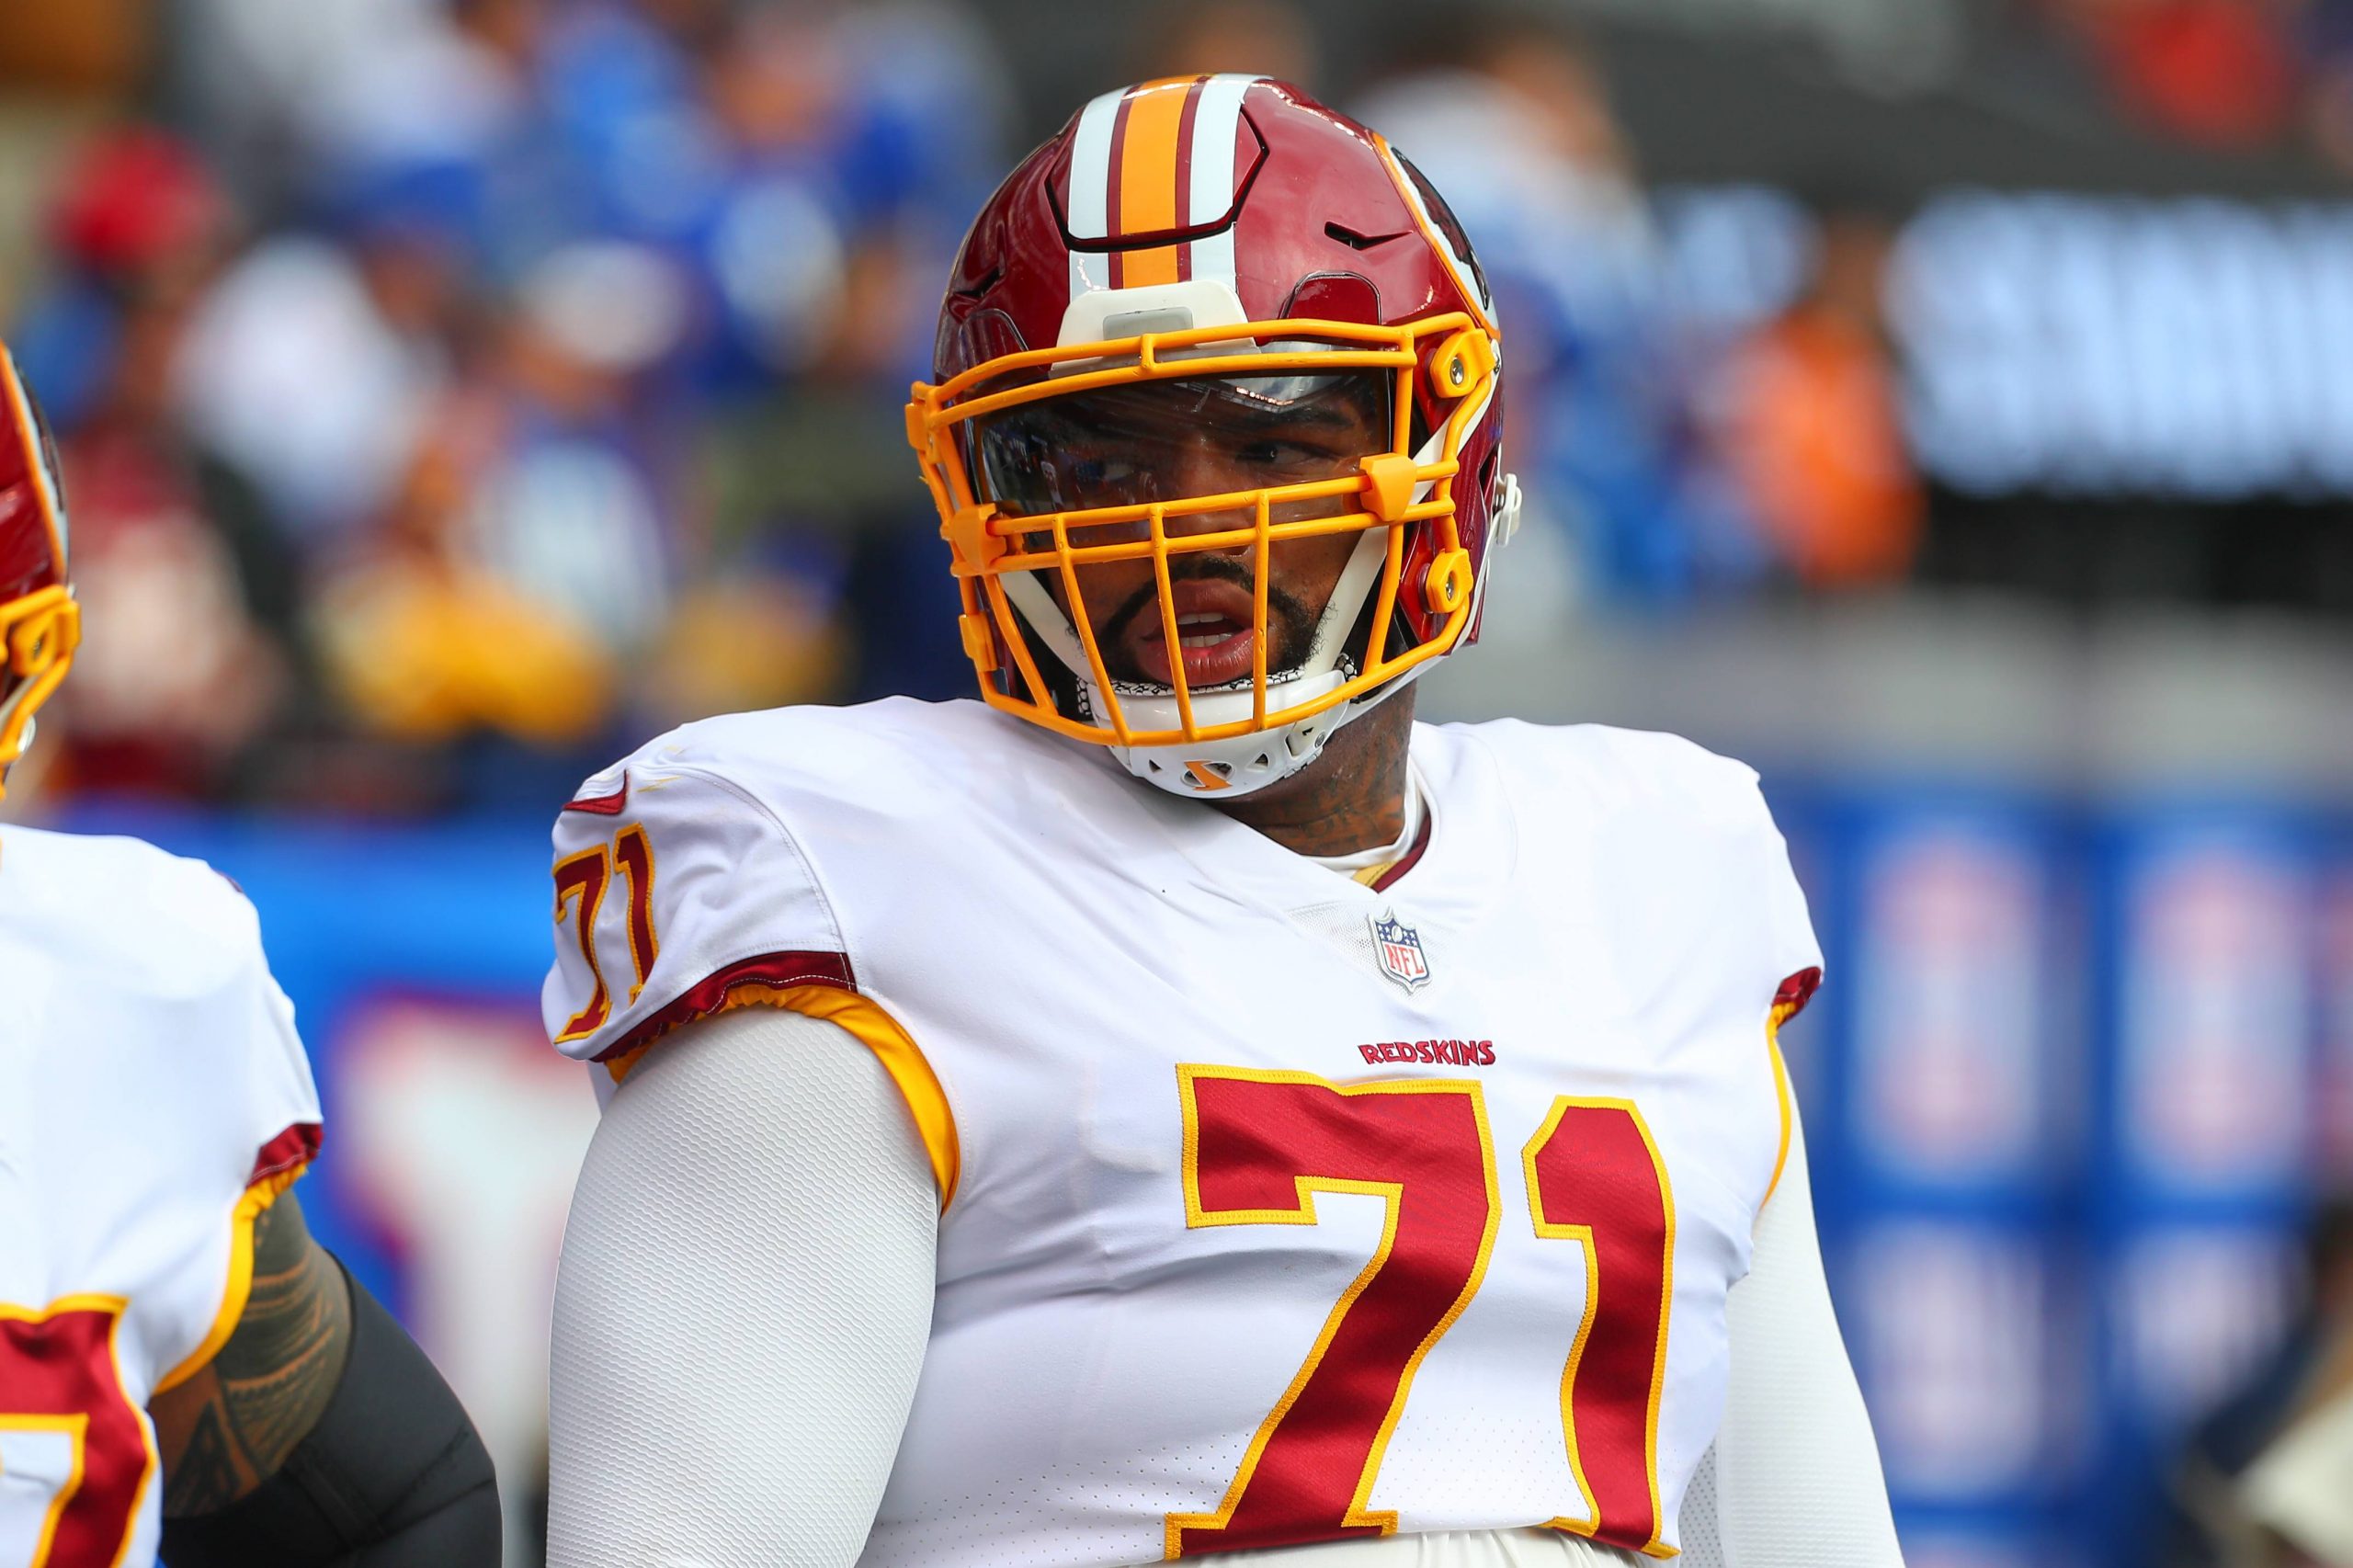 EAST RUTHERFORD NJ OCTOBER 28 Washington Redskins offensive tackle Trent Williams 71 prior to